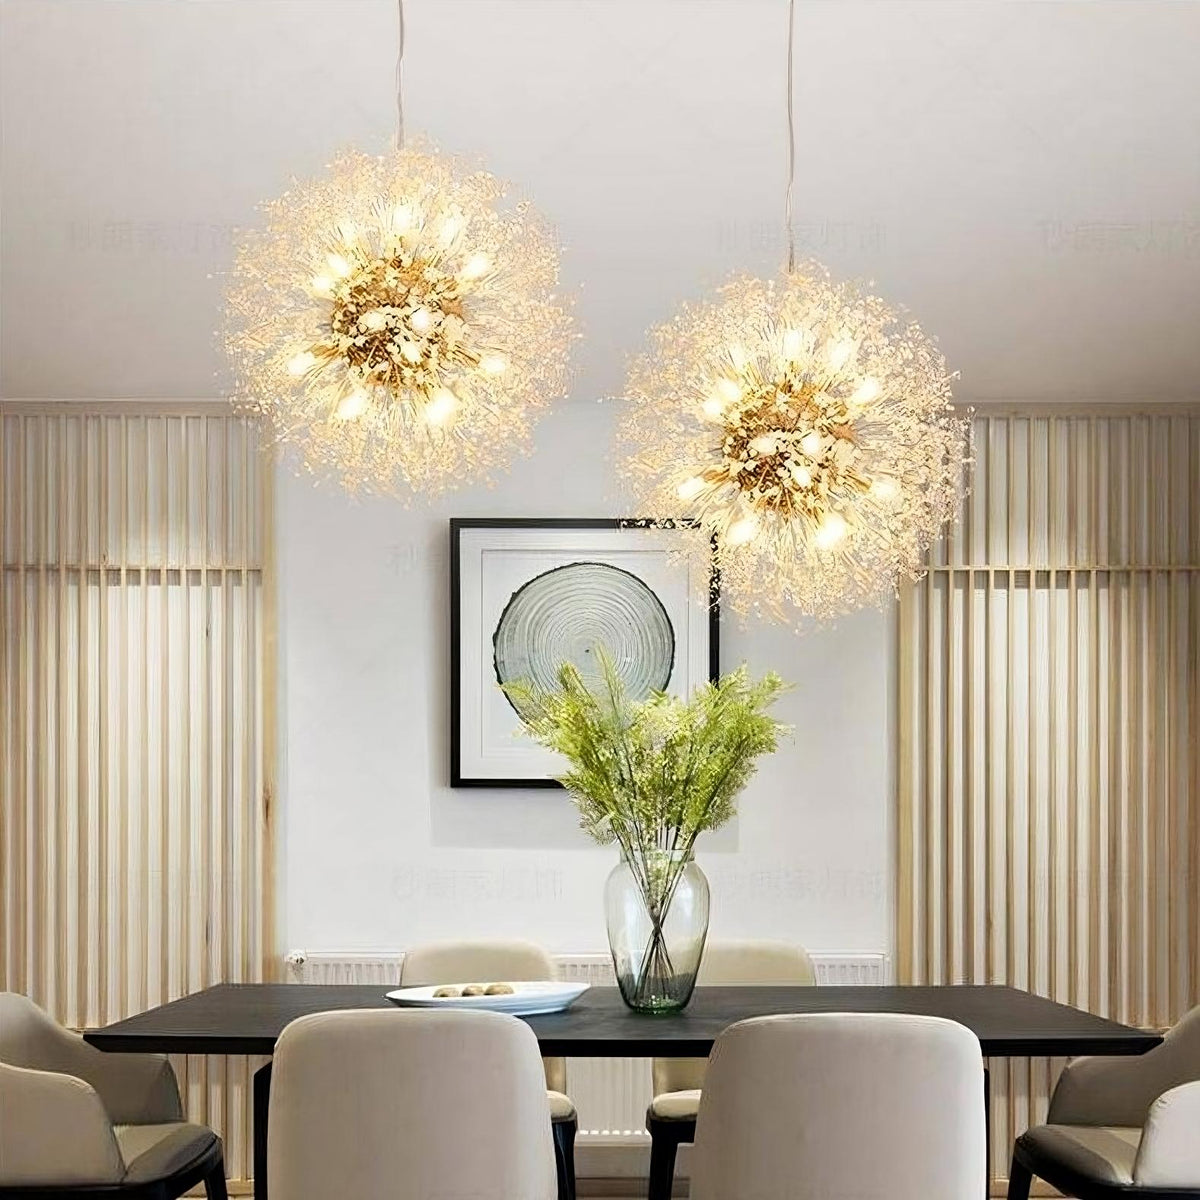 Two ornate Morsale.com Crystal Dandelion Sphere Ceiling Lights hang above a dining table, casting a warm glow over a minimalist room with beige walls, modern art, and a vase of greenery.